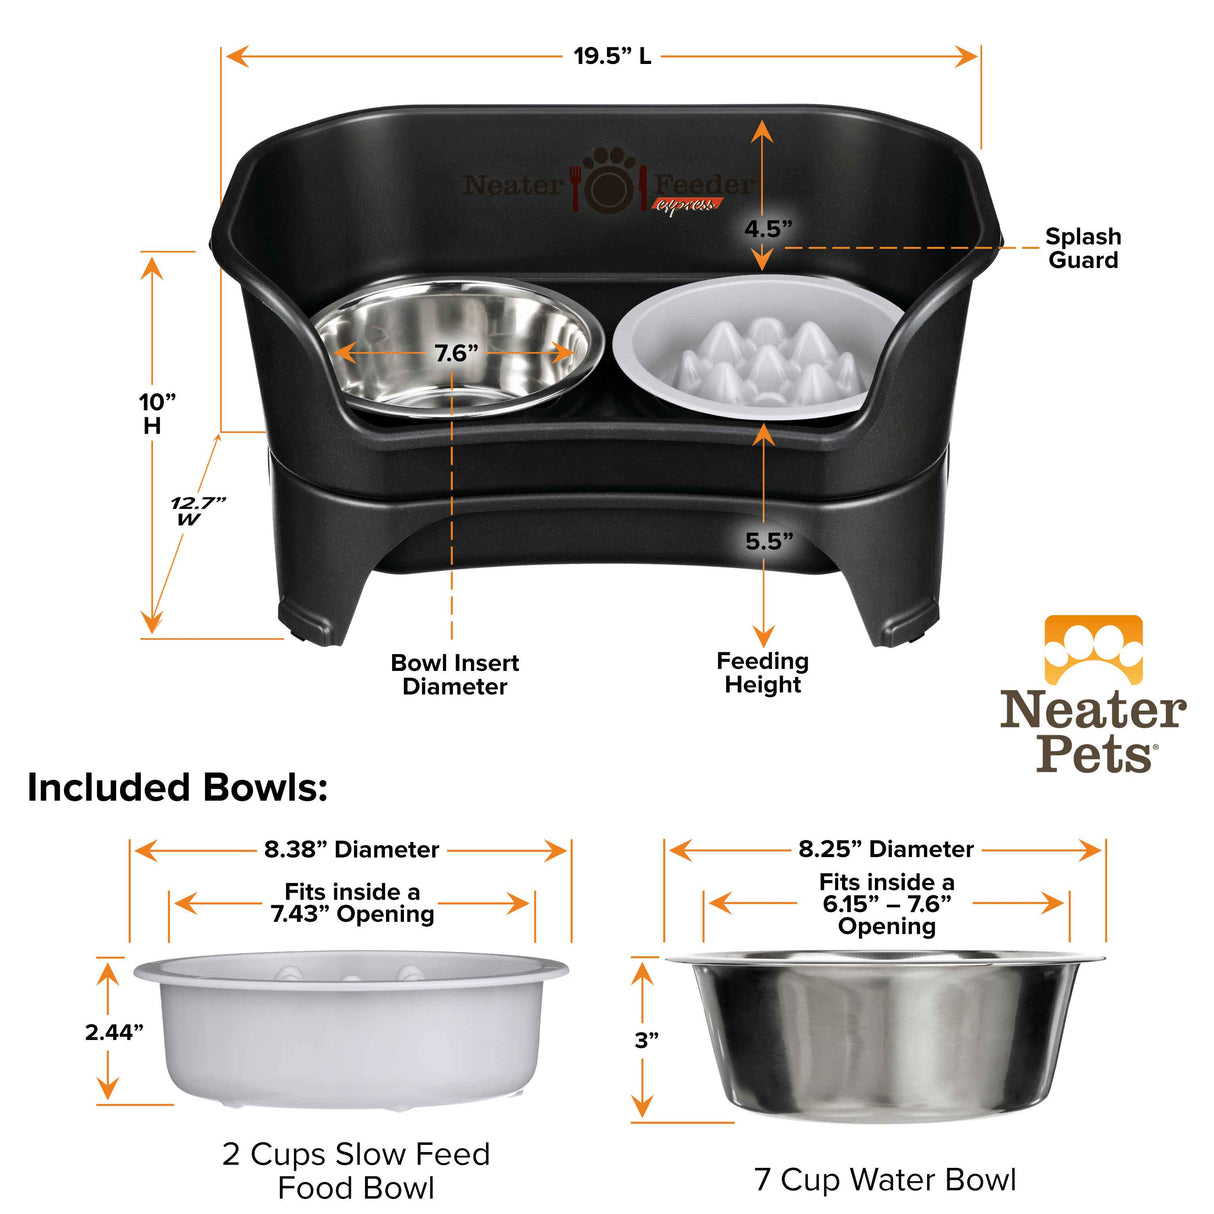 Dimensions of the midnight black medium to large EXPRESS Neater Feeder, The Niner Slow Feed Bowl, and the seven cup water bowl